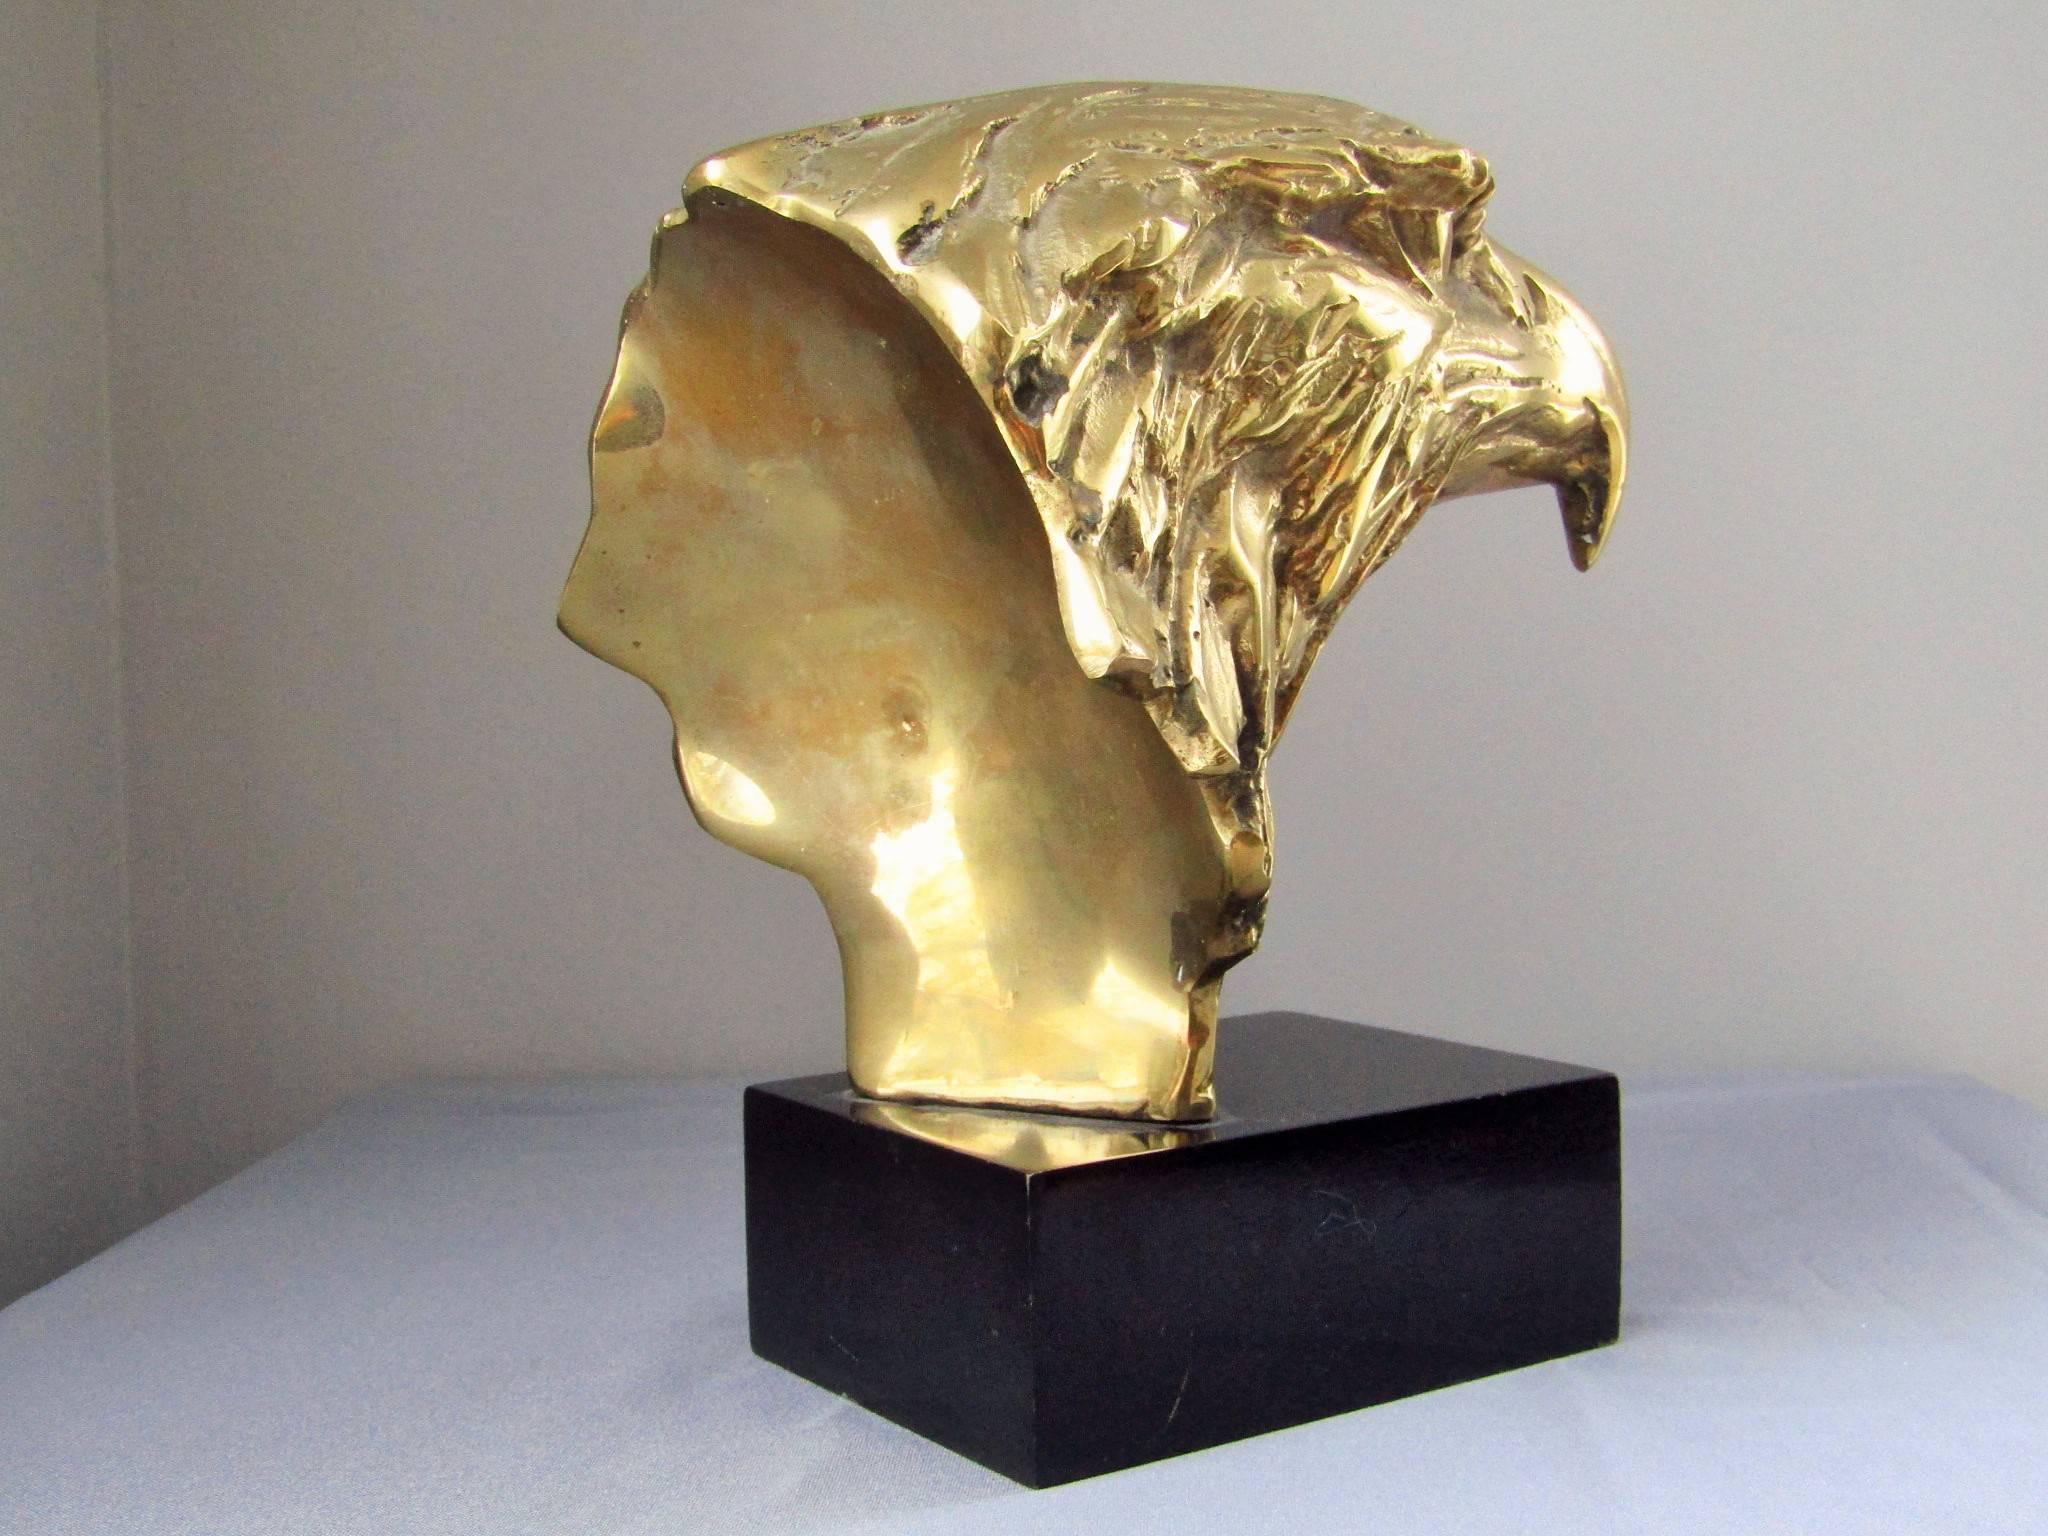 Midcentury scupture American white headed Eagle, brass on wooden base.

Worldwide free shipping of this item.